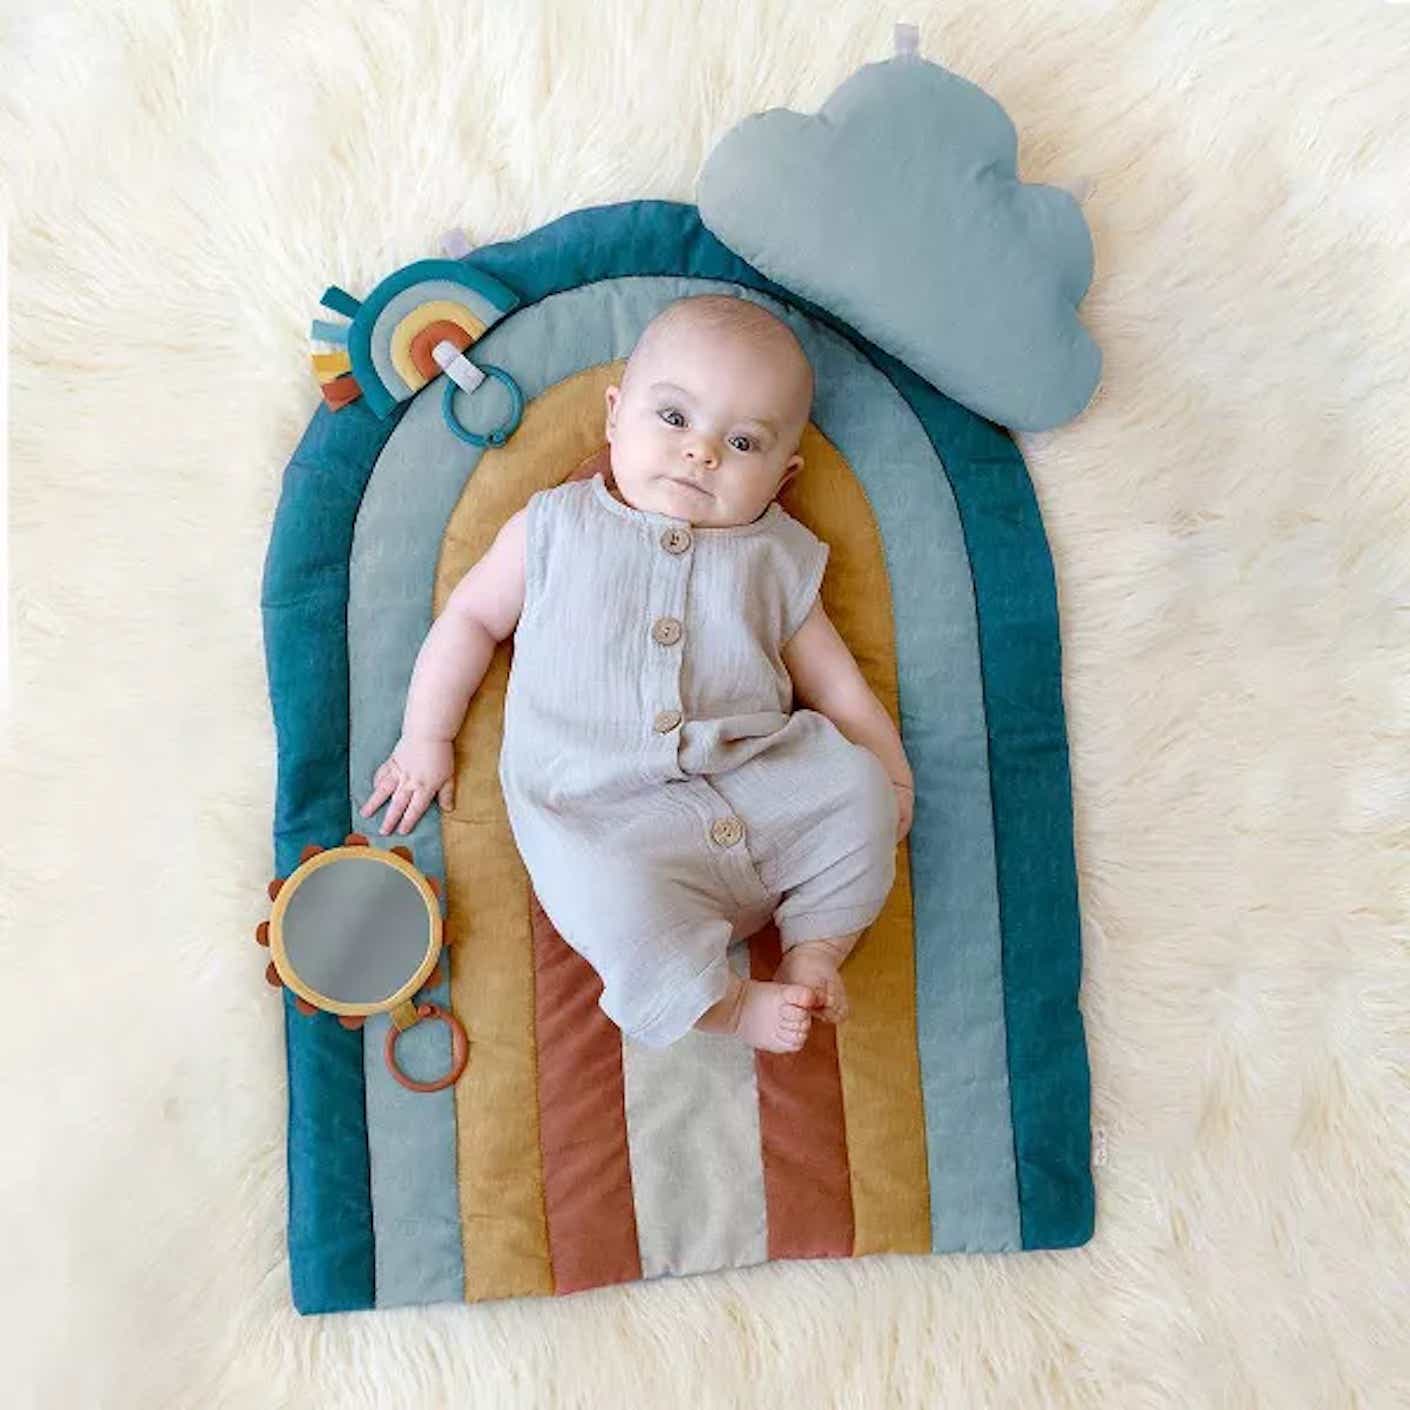 A baby on a tummy time mat